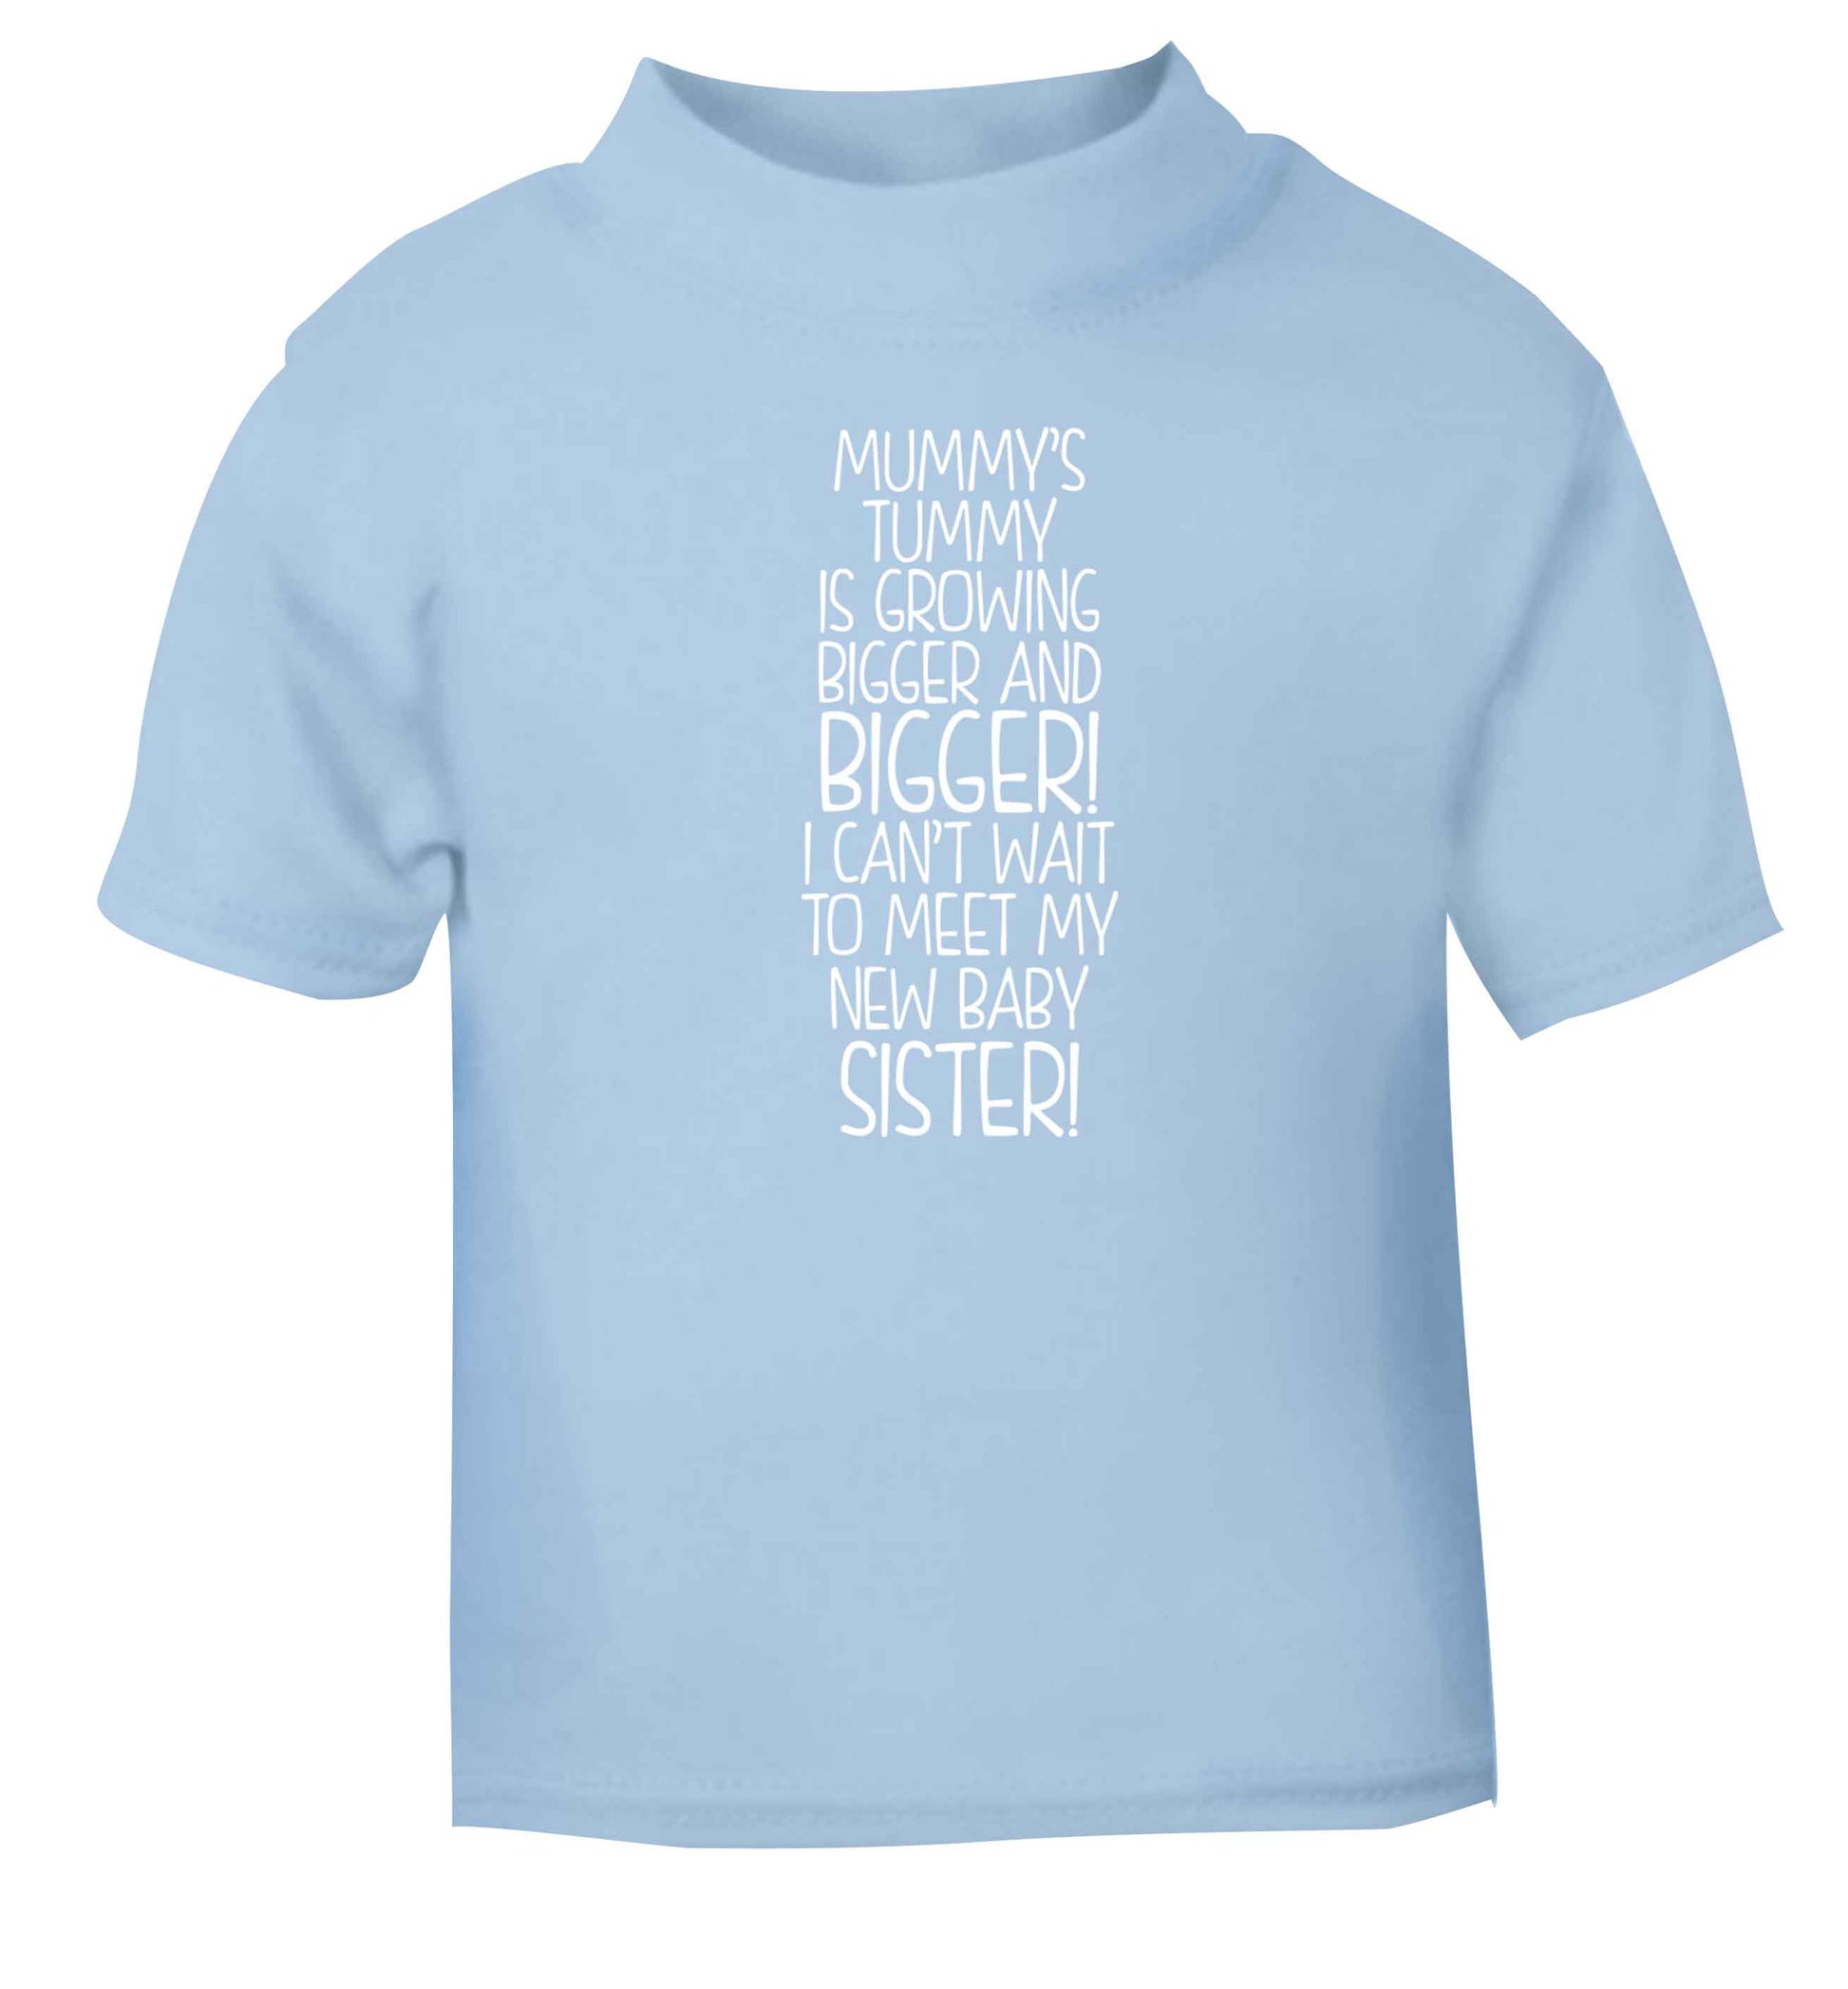 Mummy's tummy is growing bigger and bigger I can't wait to meet my new baby sister! light blue Baby Toddler Tshirt 2 Years